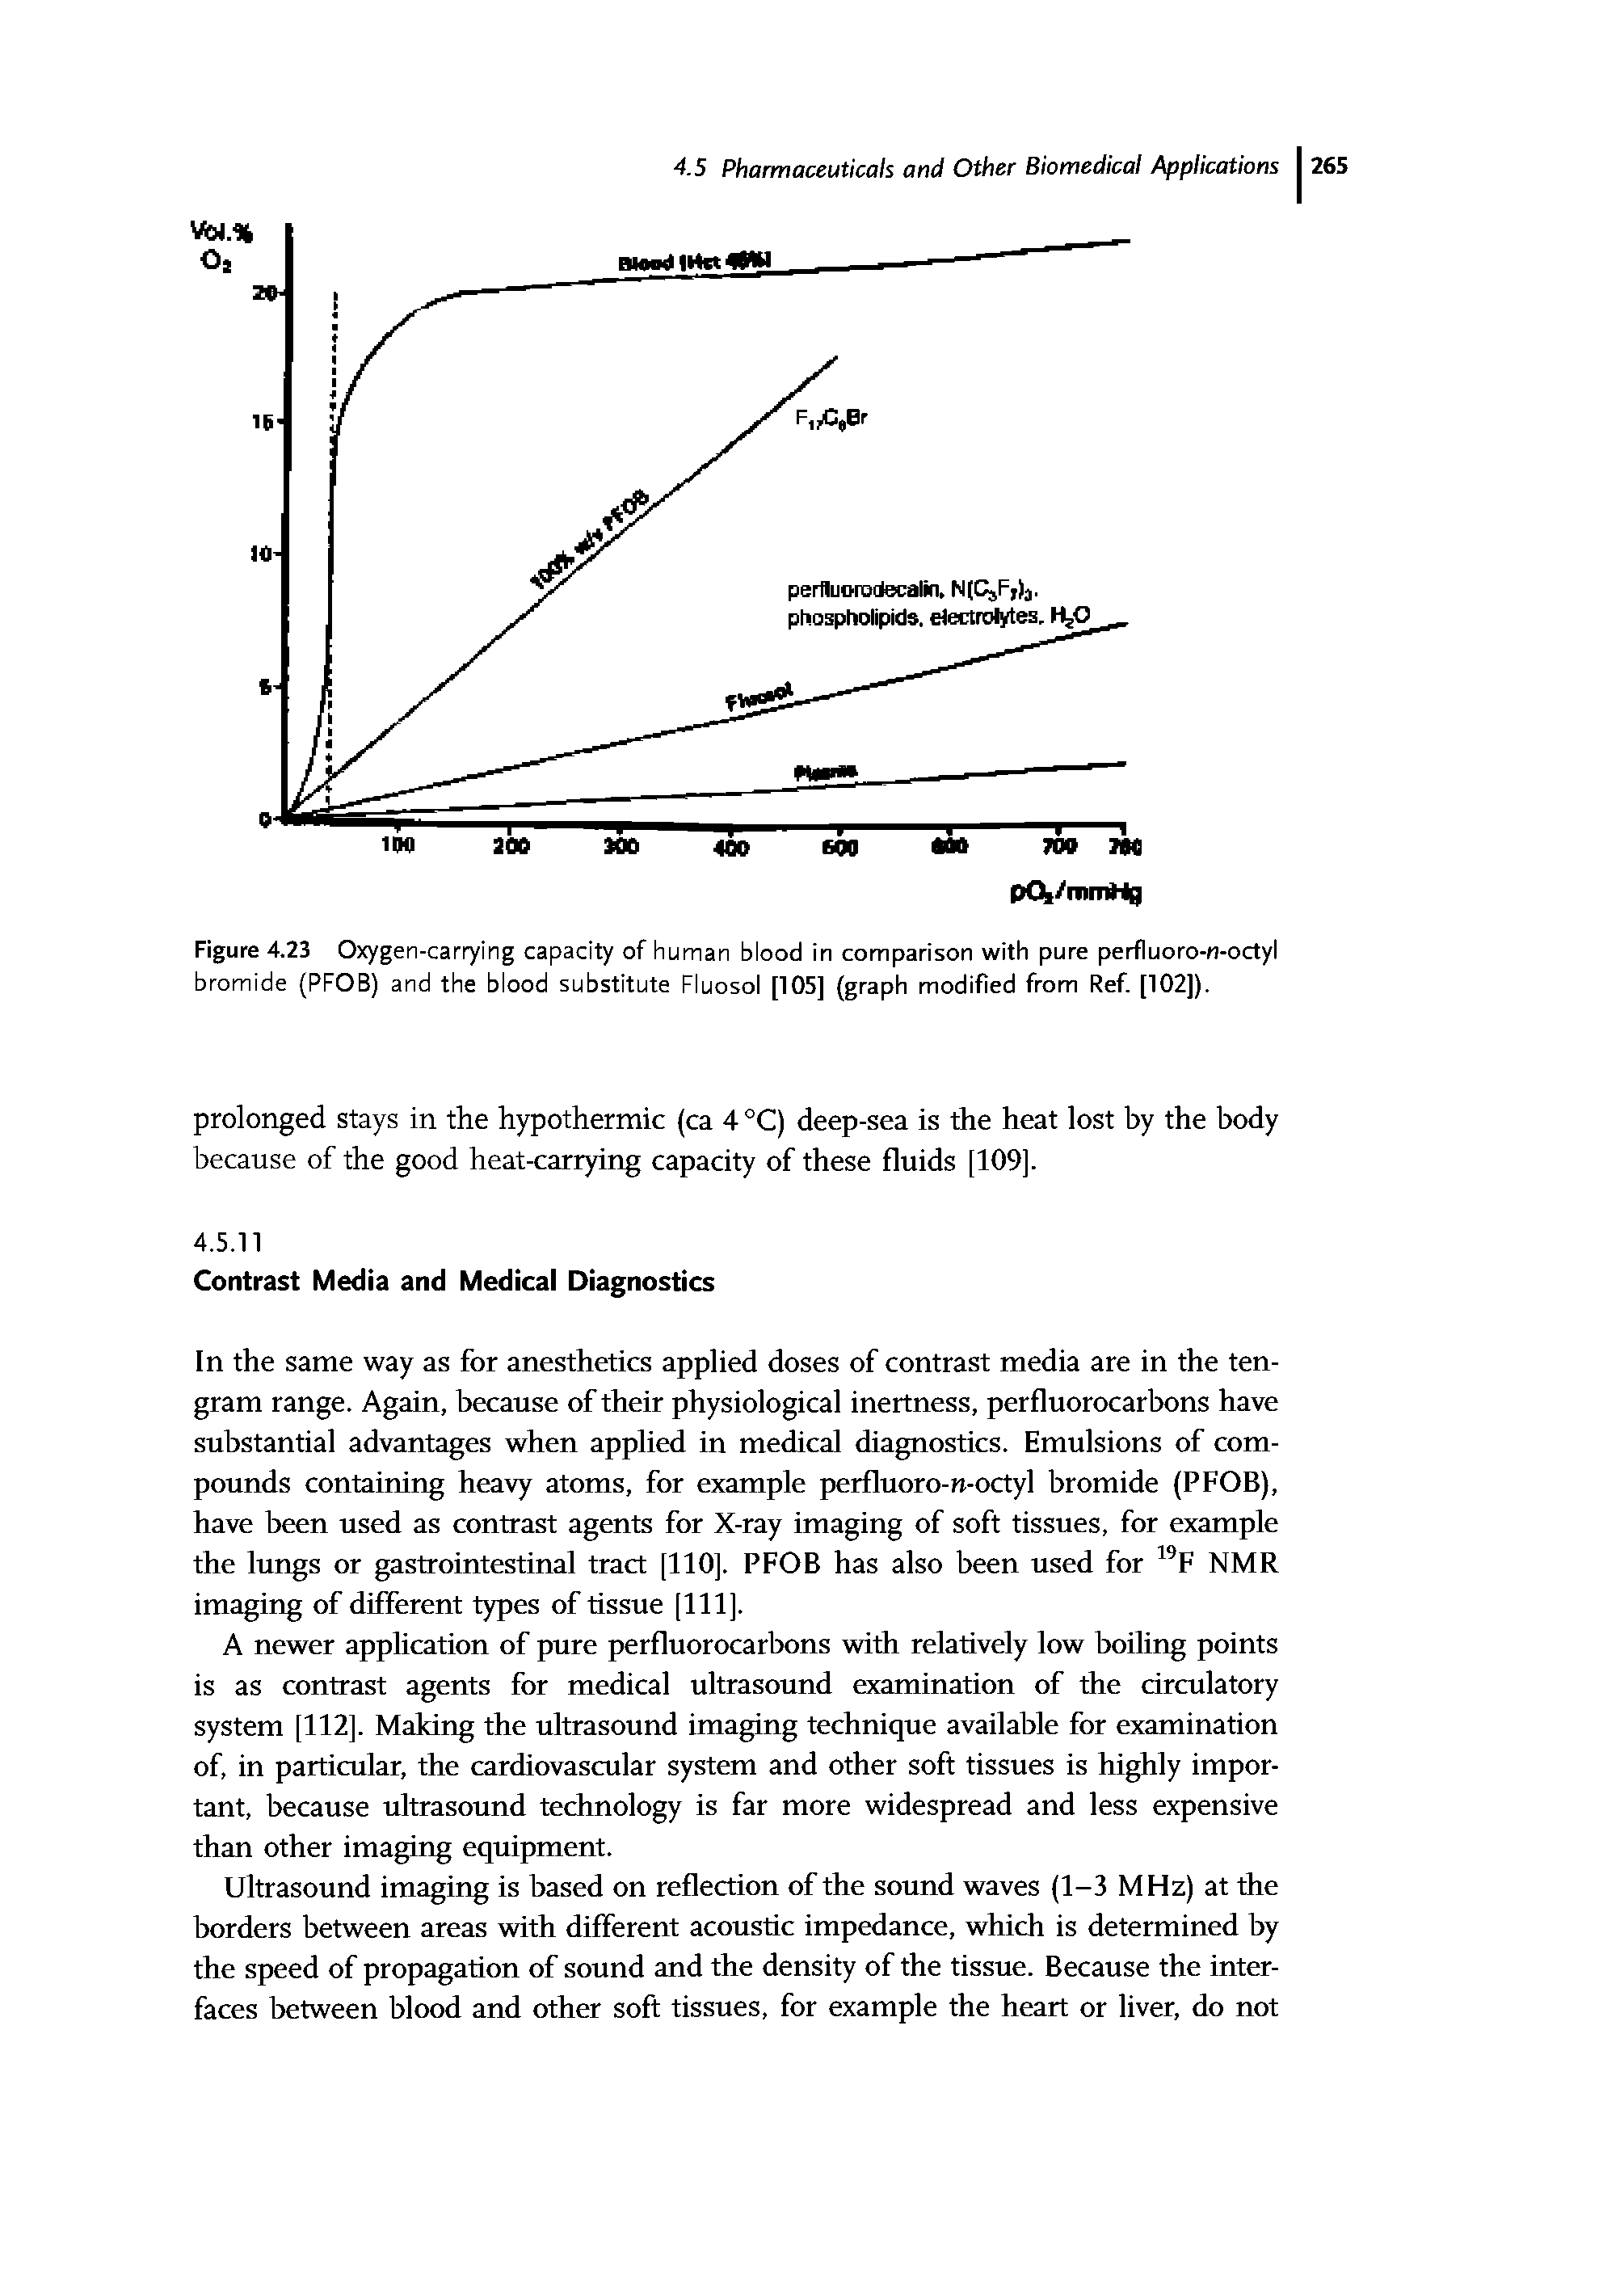 Figure 4.23 Oxygen-car7ing capacity of human blood in comparison with pure perfluoro-n-octyl bromide (PFOB) and the blood substitute Fluosol [105] (graph modified from Ref. [102]).